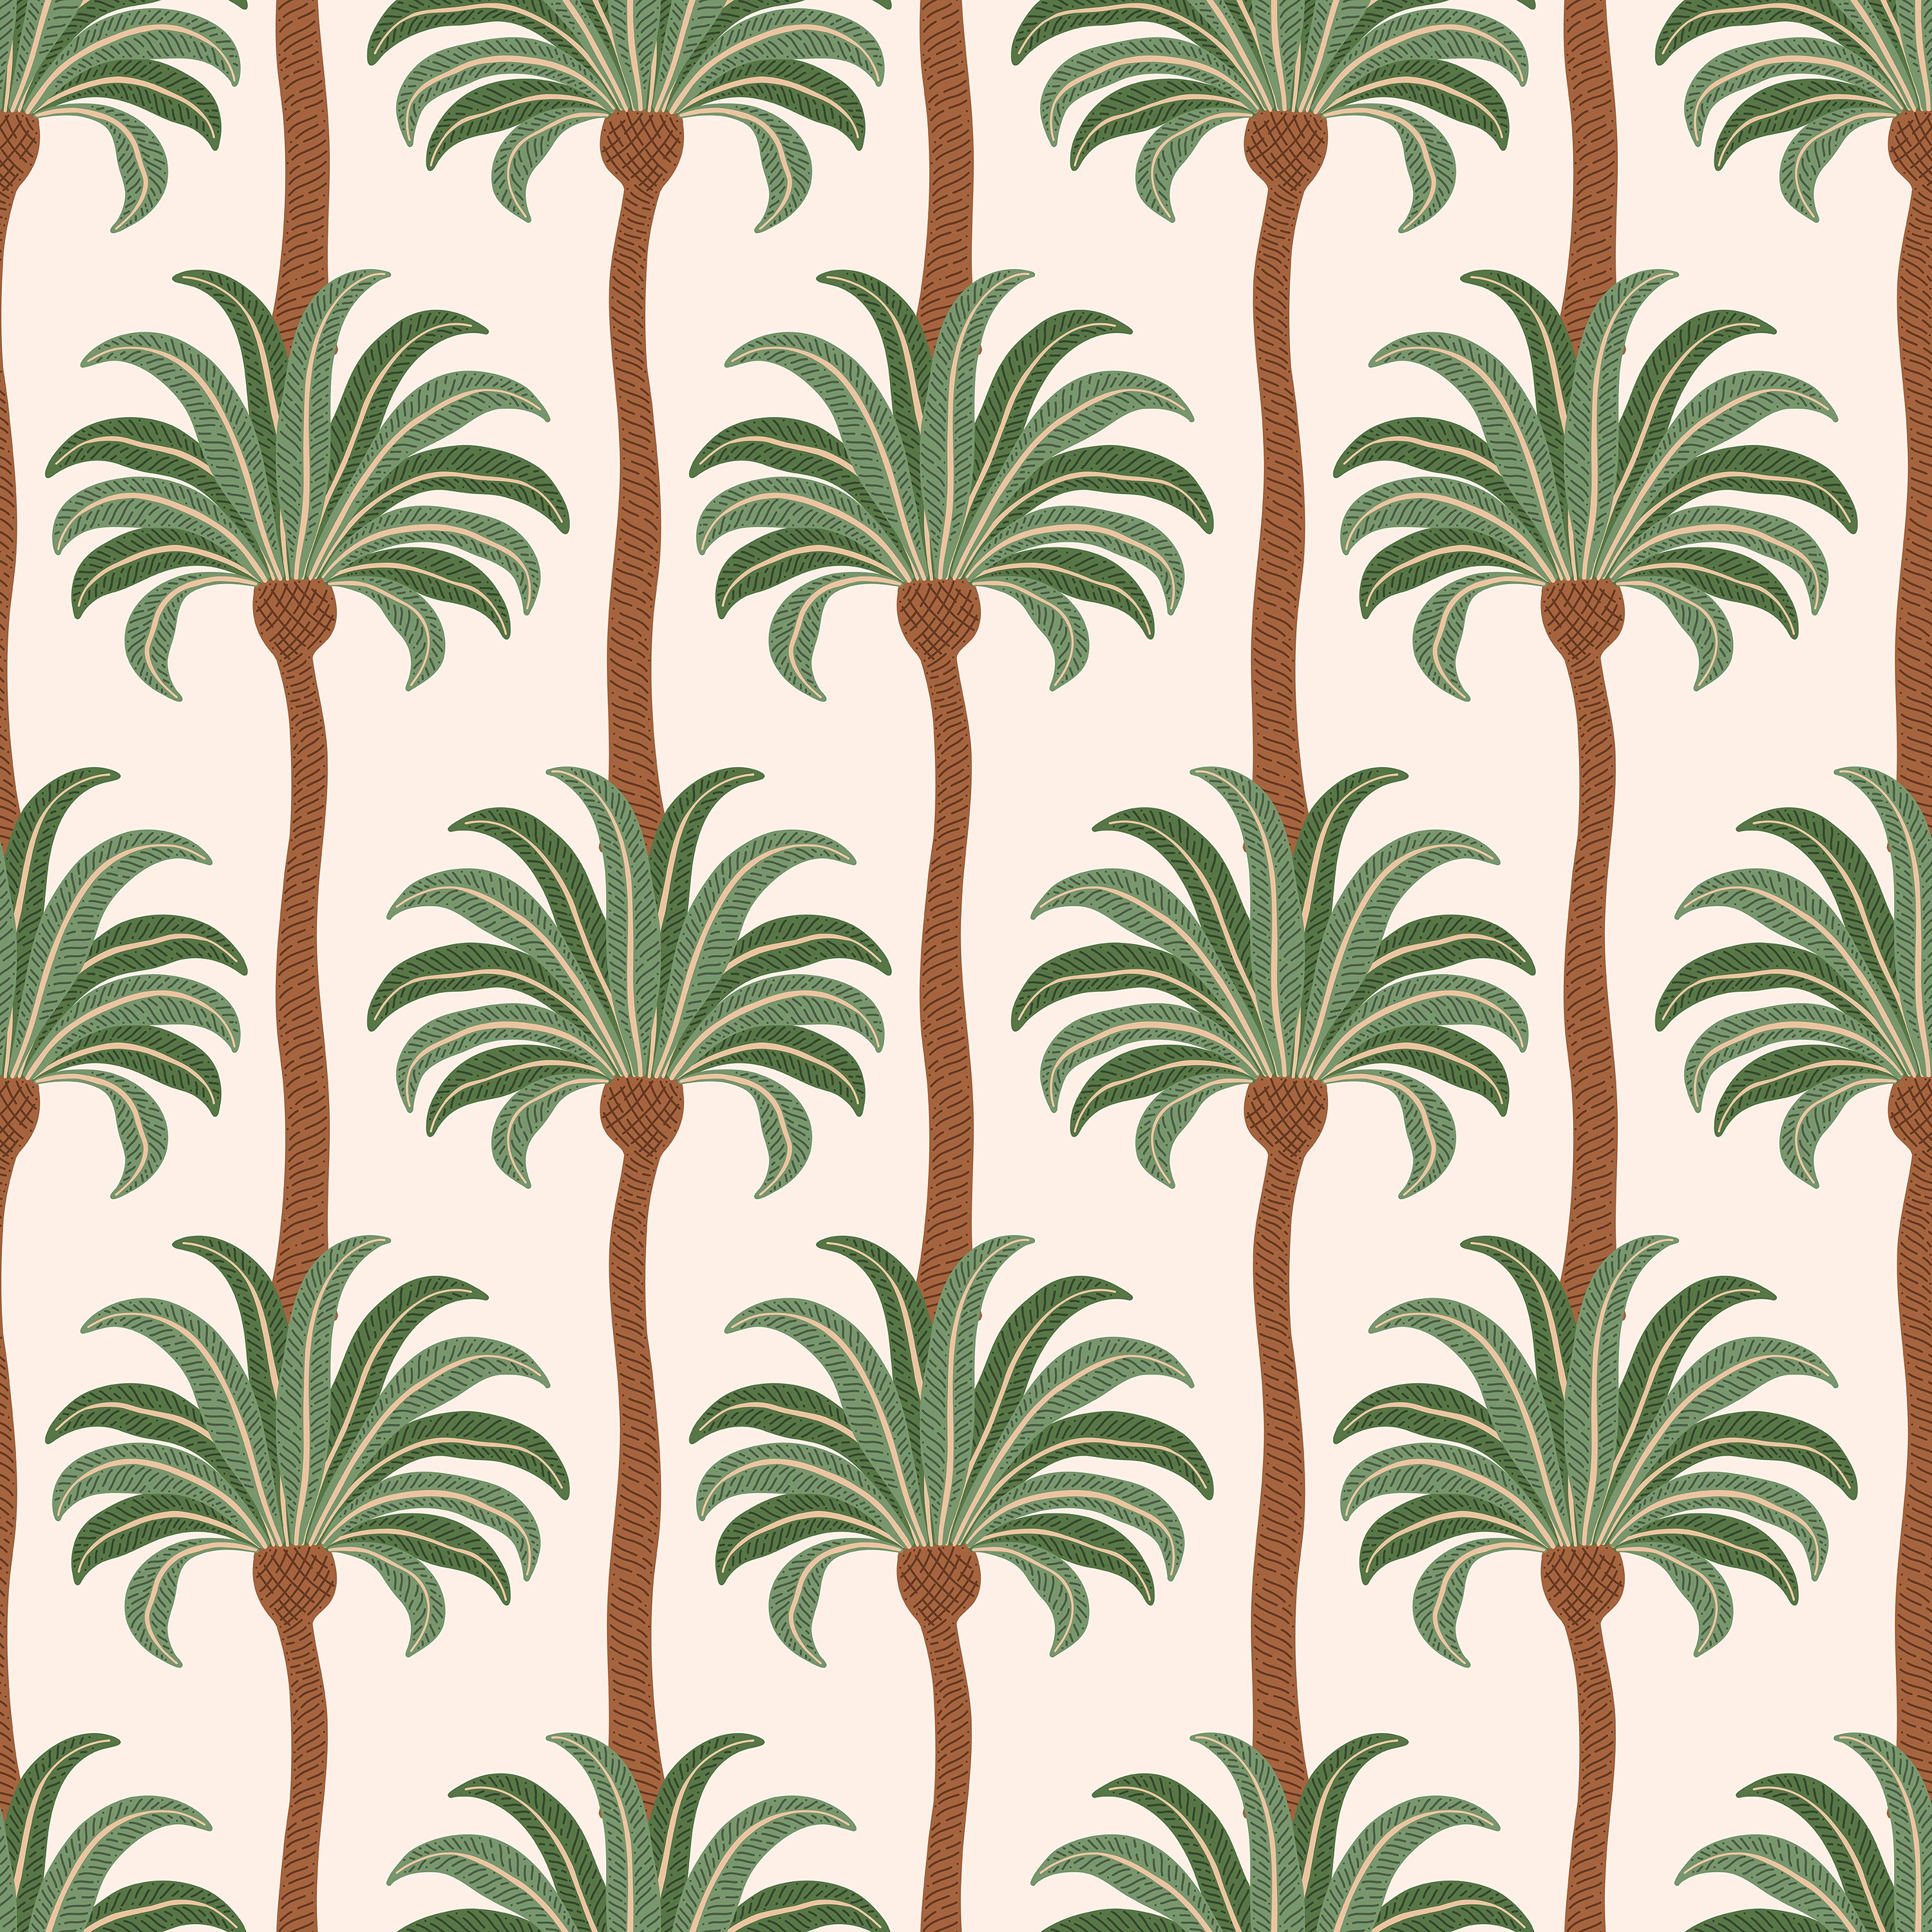 A seamless pattern of Tropical Palm Dreams wallpaper showcasing tall, elegant palm trees with detailed green fronds and textured brown trunks on a soft beige background